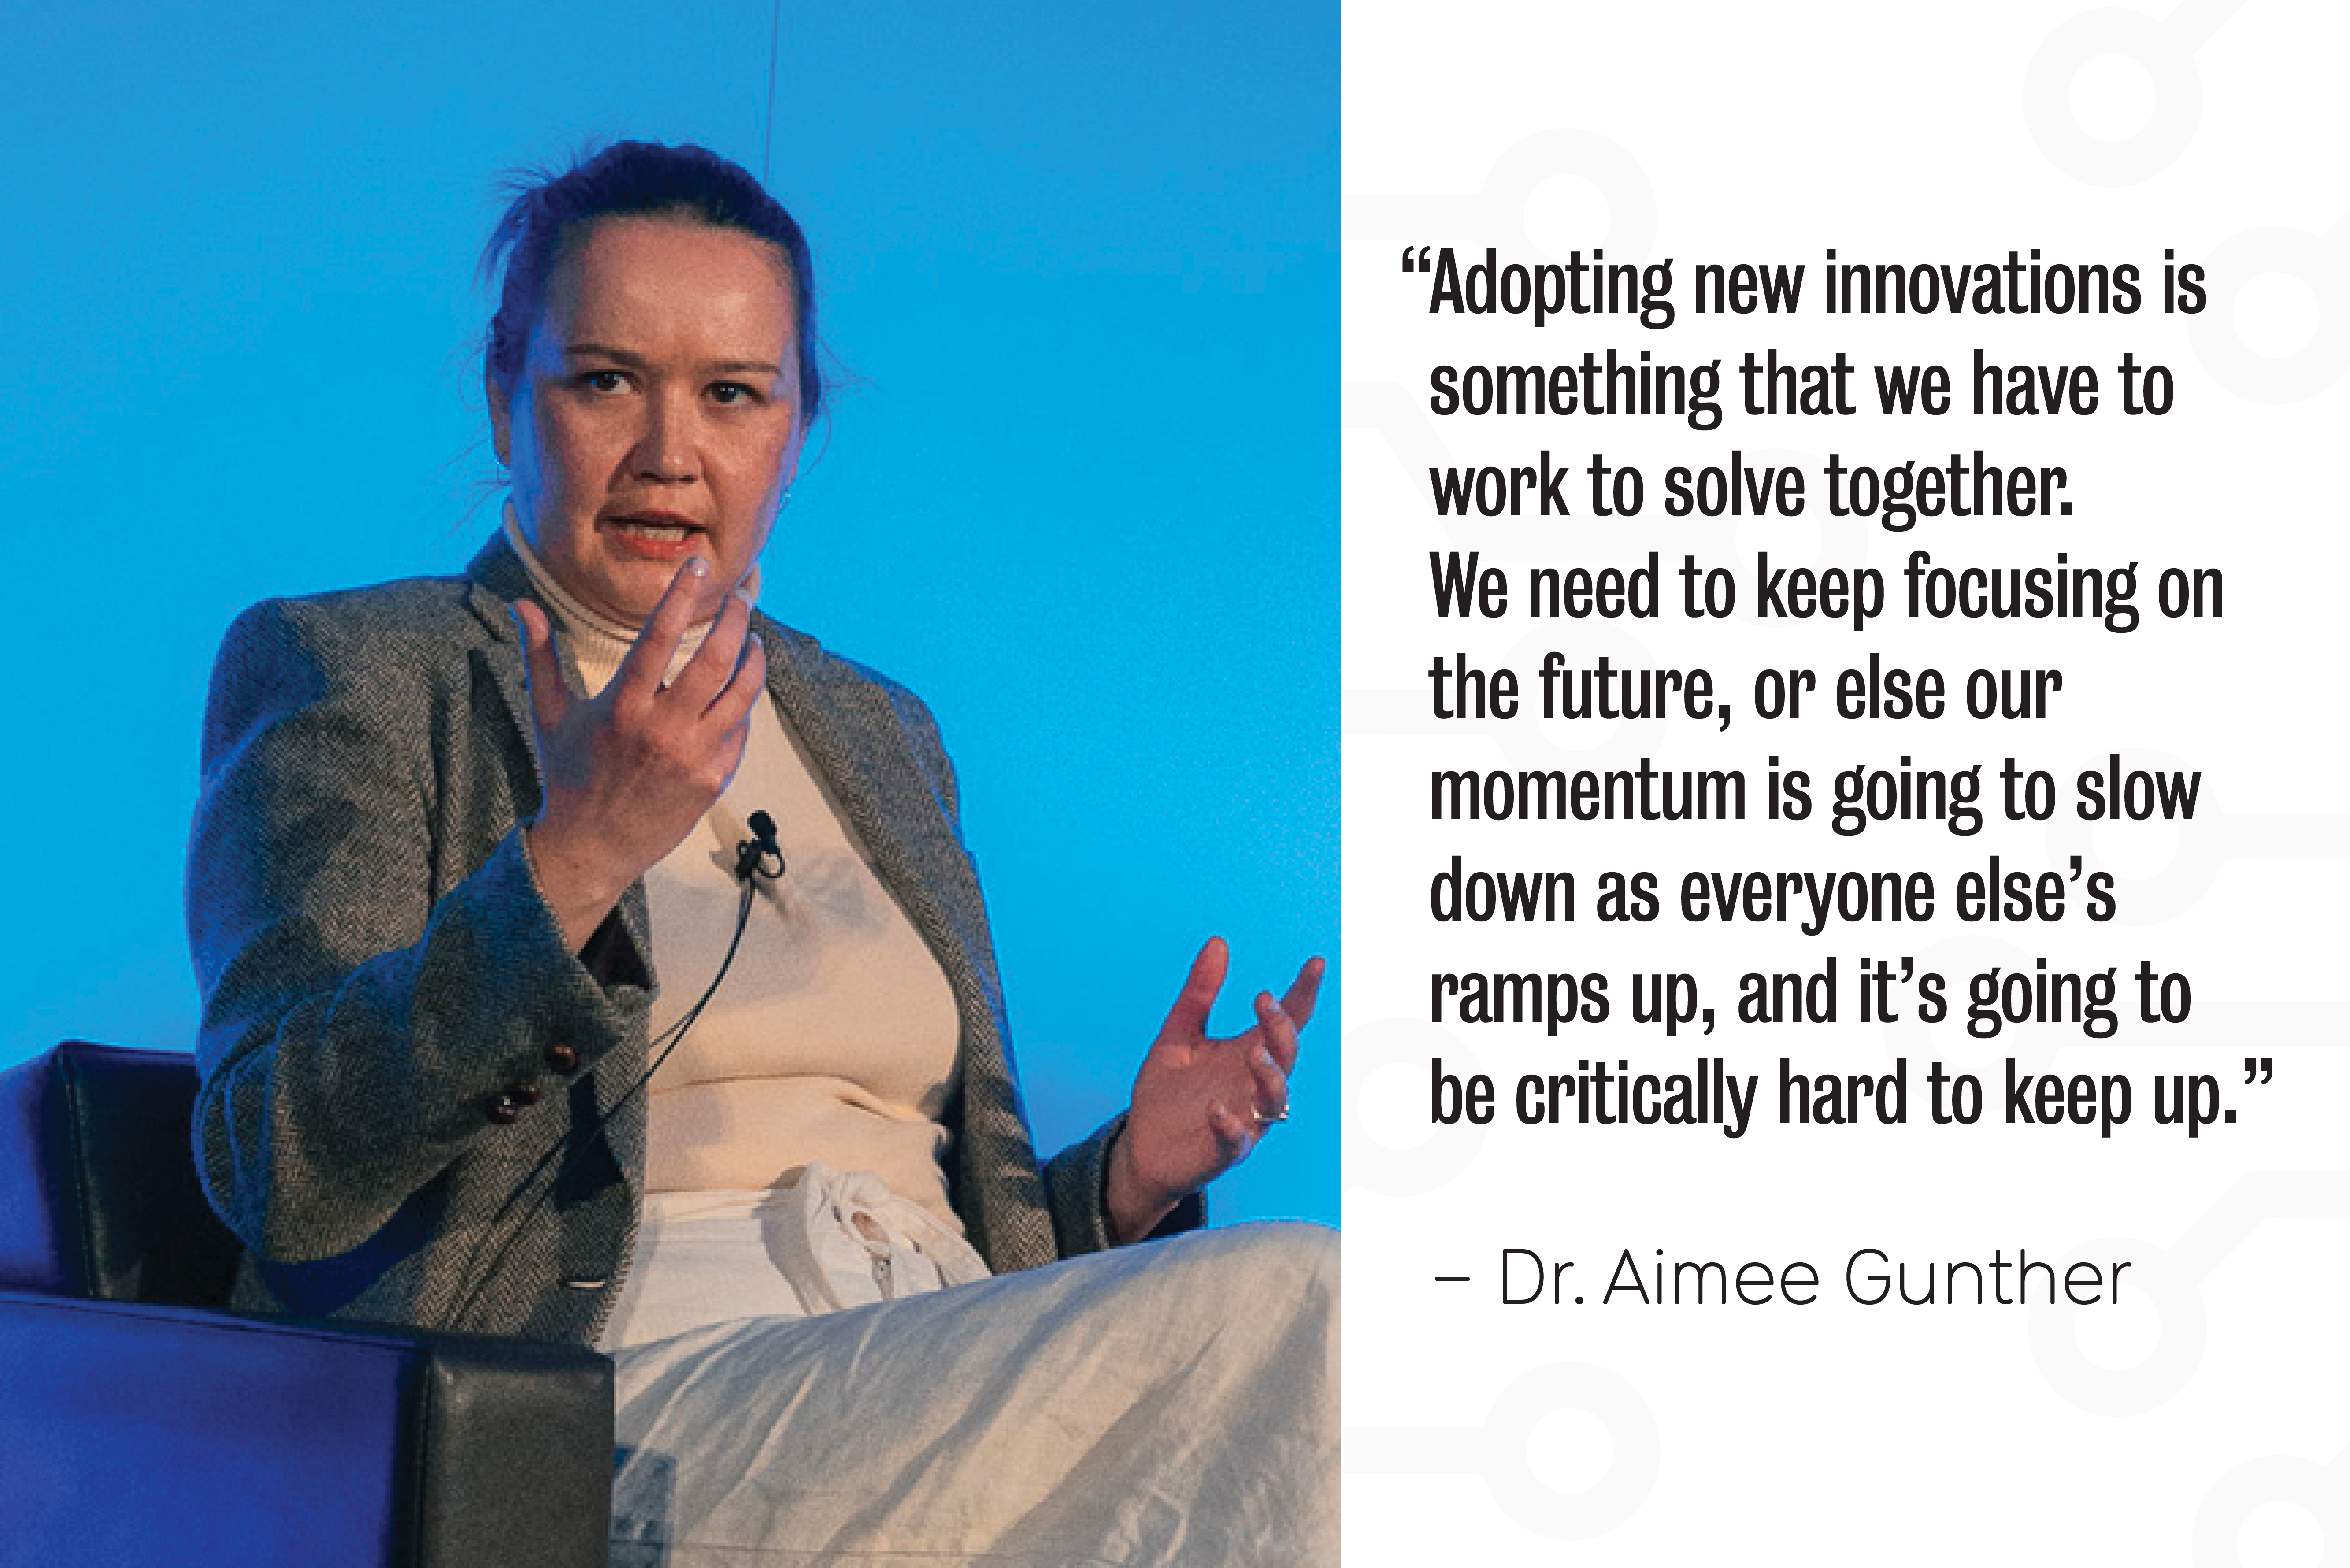 A photo of Dr. Aimee Gunther with a quote: “Adopting new innovations is something that we have to work to solve together. We need to keep focusing on the future, or else our momentum is going to slow down as everyone else’s ramps up, and it’s going to be critically hard to keep up.”